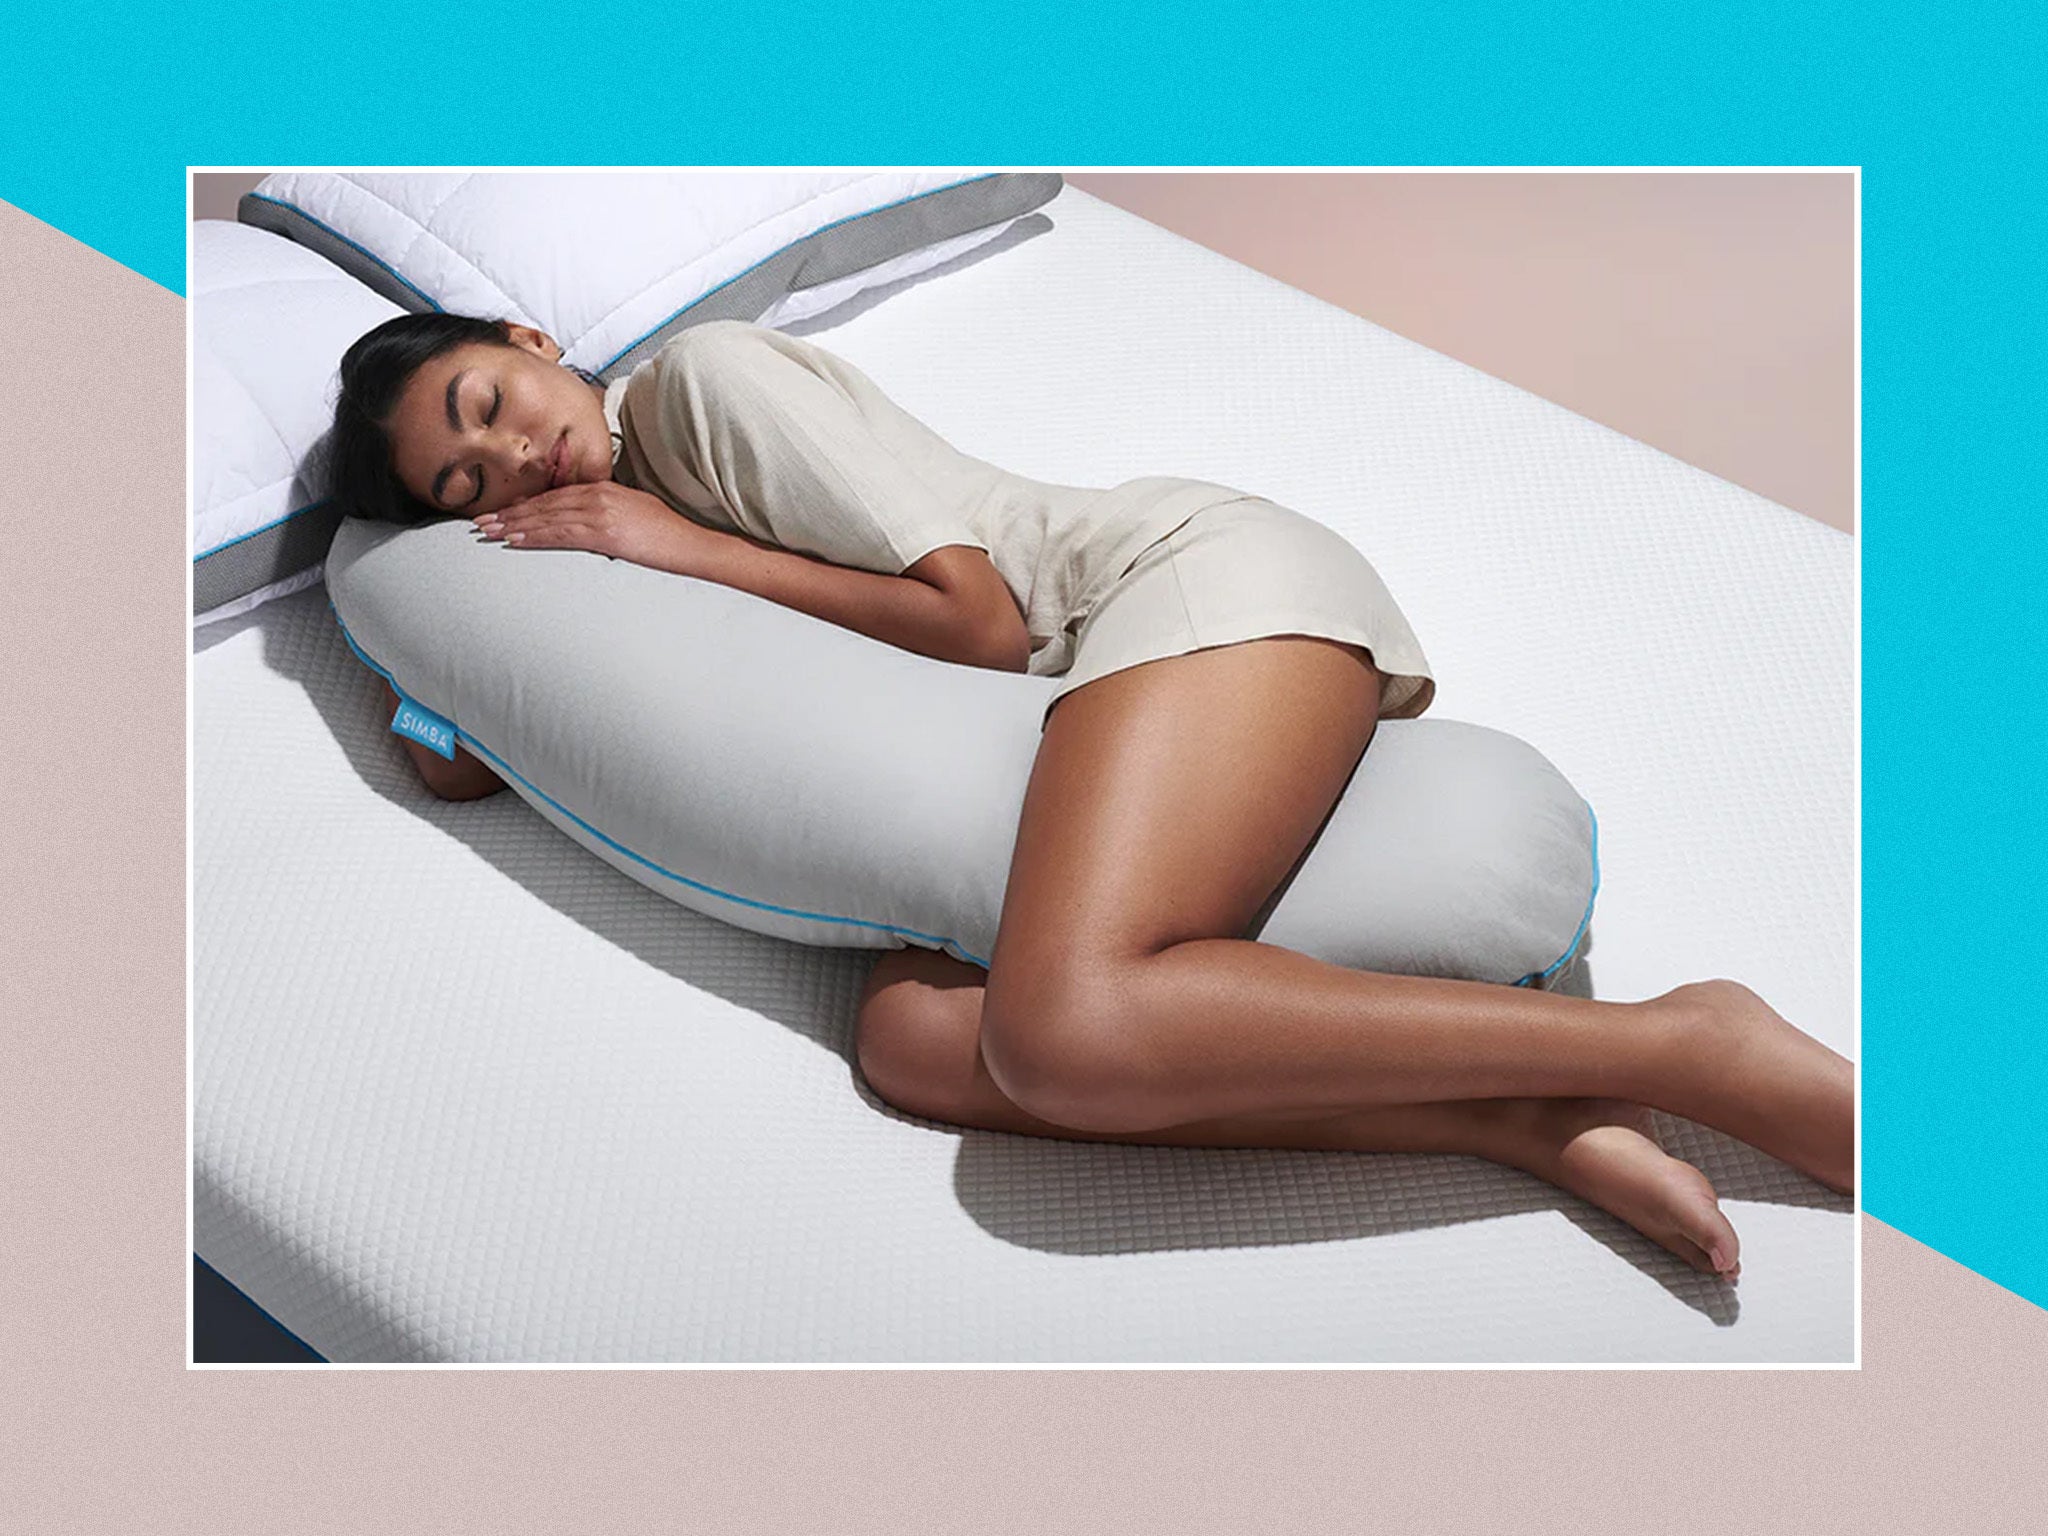 Simba cooling body pillow review: This pillow transformed our sleep